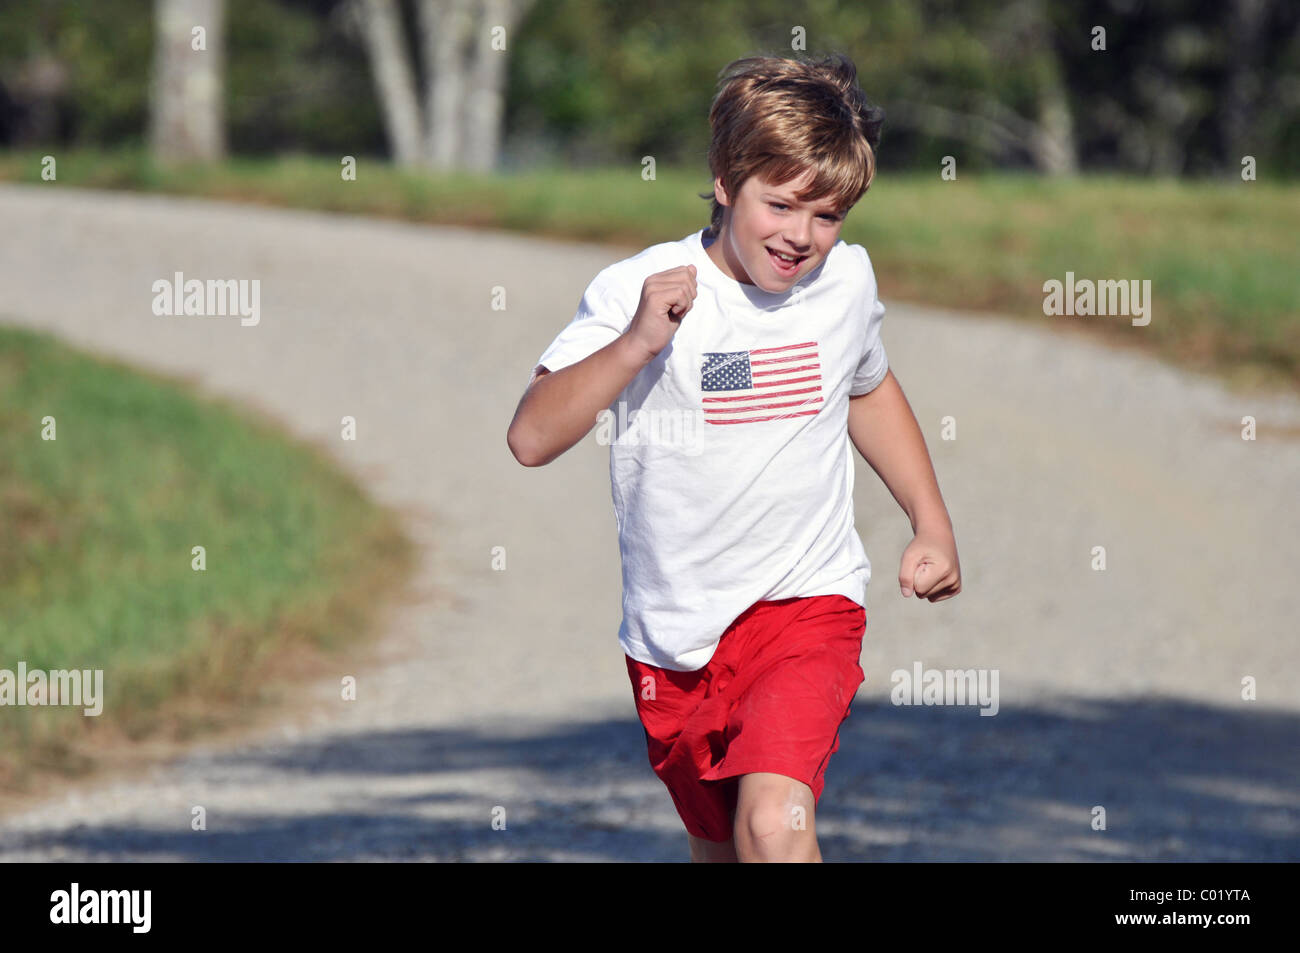 11 year old boy running up road Stock Photo